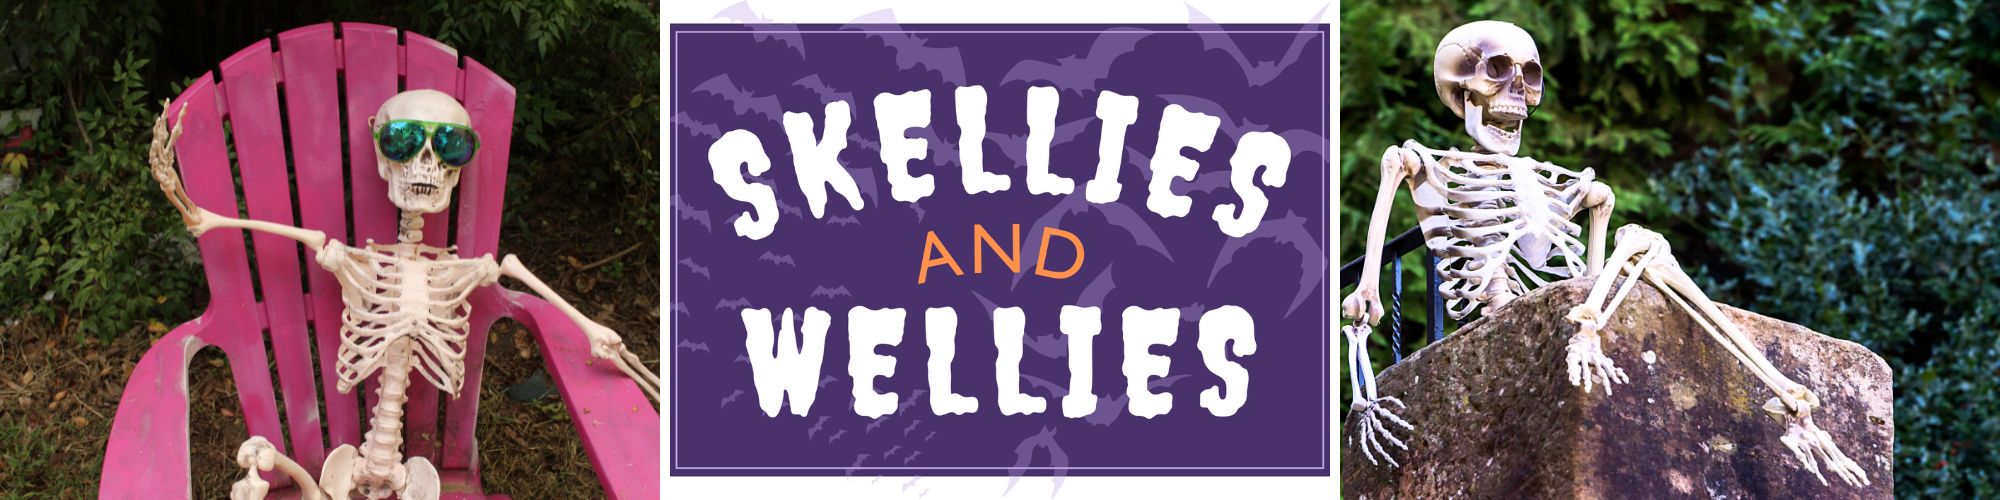 Skellies and Wellies Collage